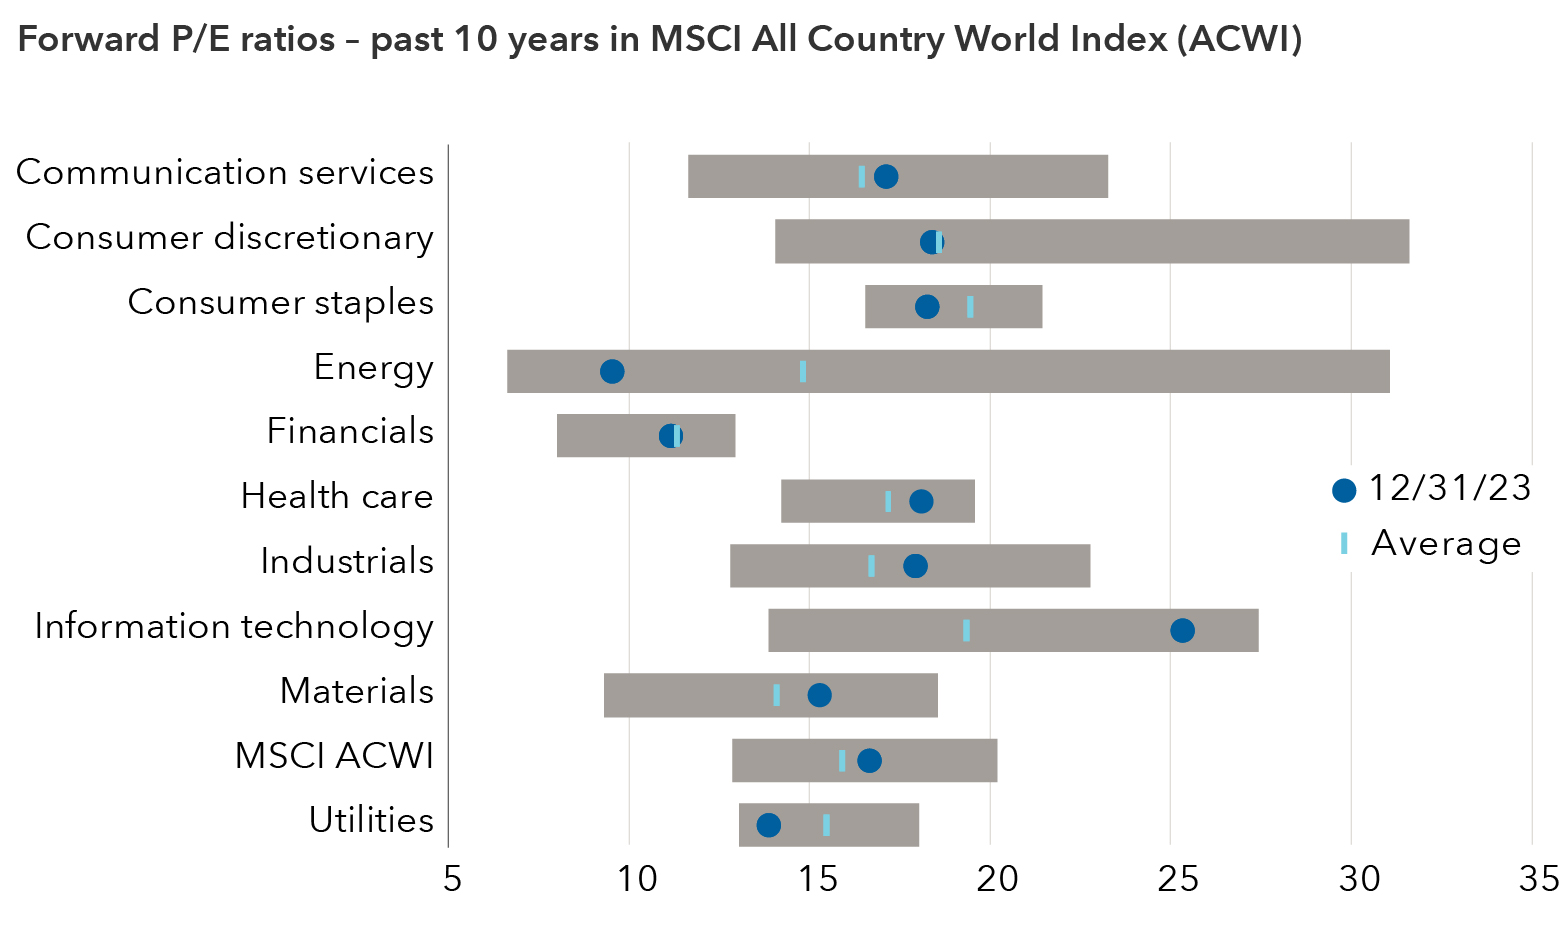 Chart compares the MSCI All Countries World Index price-to-earnings ratios by sector with their respective 10-year averages. The index is currently trading at 16.7 times earnings versus its 10-year average of 15.9. The information technology sector is trading at 25.3 times earnings versus its 10-year average of 19.3. The consumer discretionary sector is trading at 18.4 times earnings versus its 10-year average of 18.6. The consumer staples sector is trading at 18.3 times earnings versus its 10-year average of 19.4. The health care sector is trading at 18.1 times earnings versus its 10-year average of 17.2. The industrials sector is trading at 17.9 times earnings versus its 10-year average of 16.7. The communication services sector is trading at 17.1 times earnings versus its 10-year average of 16.4. The utilities sector is trading at 13.9 times earnings versus its 10-year average of 15.5. The materials sector is trading at 15.3 times earnings versus its 10-year average of 14.1. The financials sector is trading at 11.2 times earnings versus its 10-year average of 11.3. The energy sector is trading at 9.5 times earnings versus its 10-year average of 14.8. 